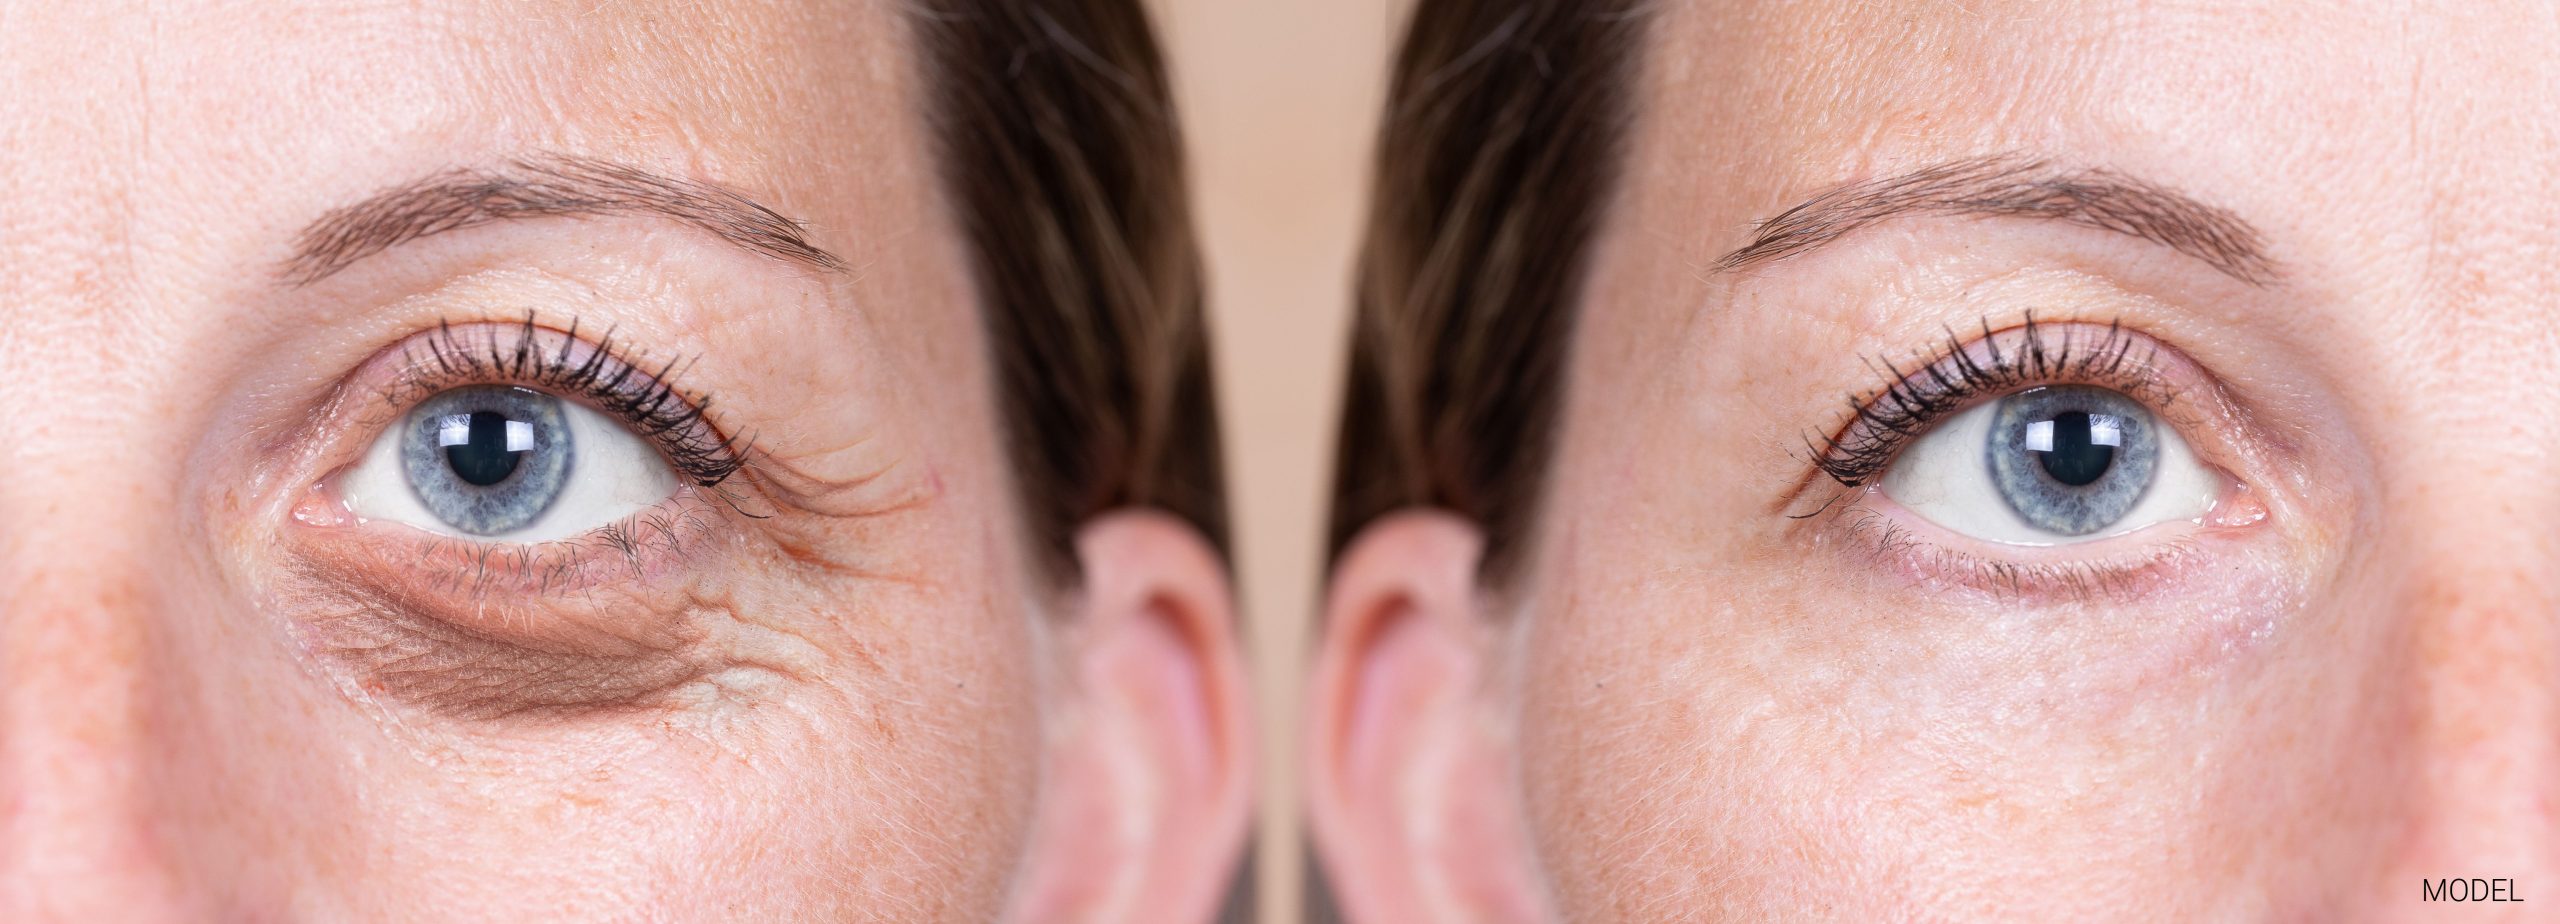 Top 5 Reasons to Consider Blepharoplasty This New Year - Pincus Plastic  Surgery